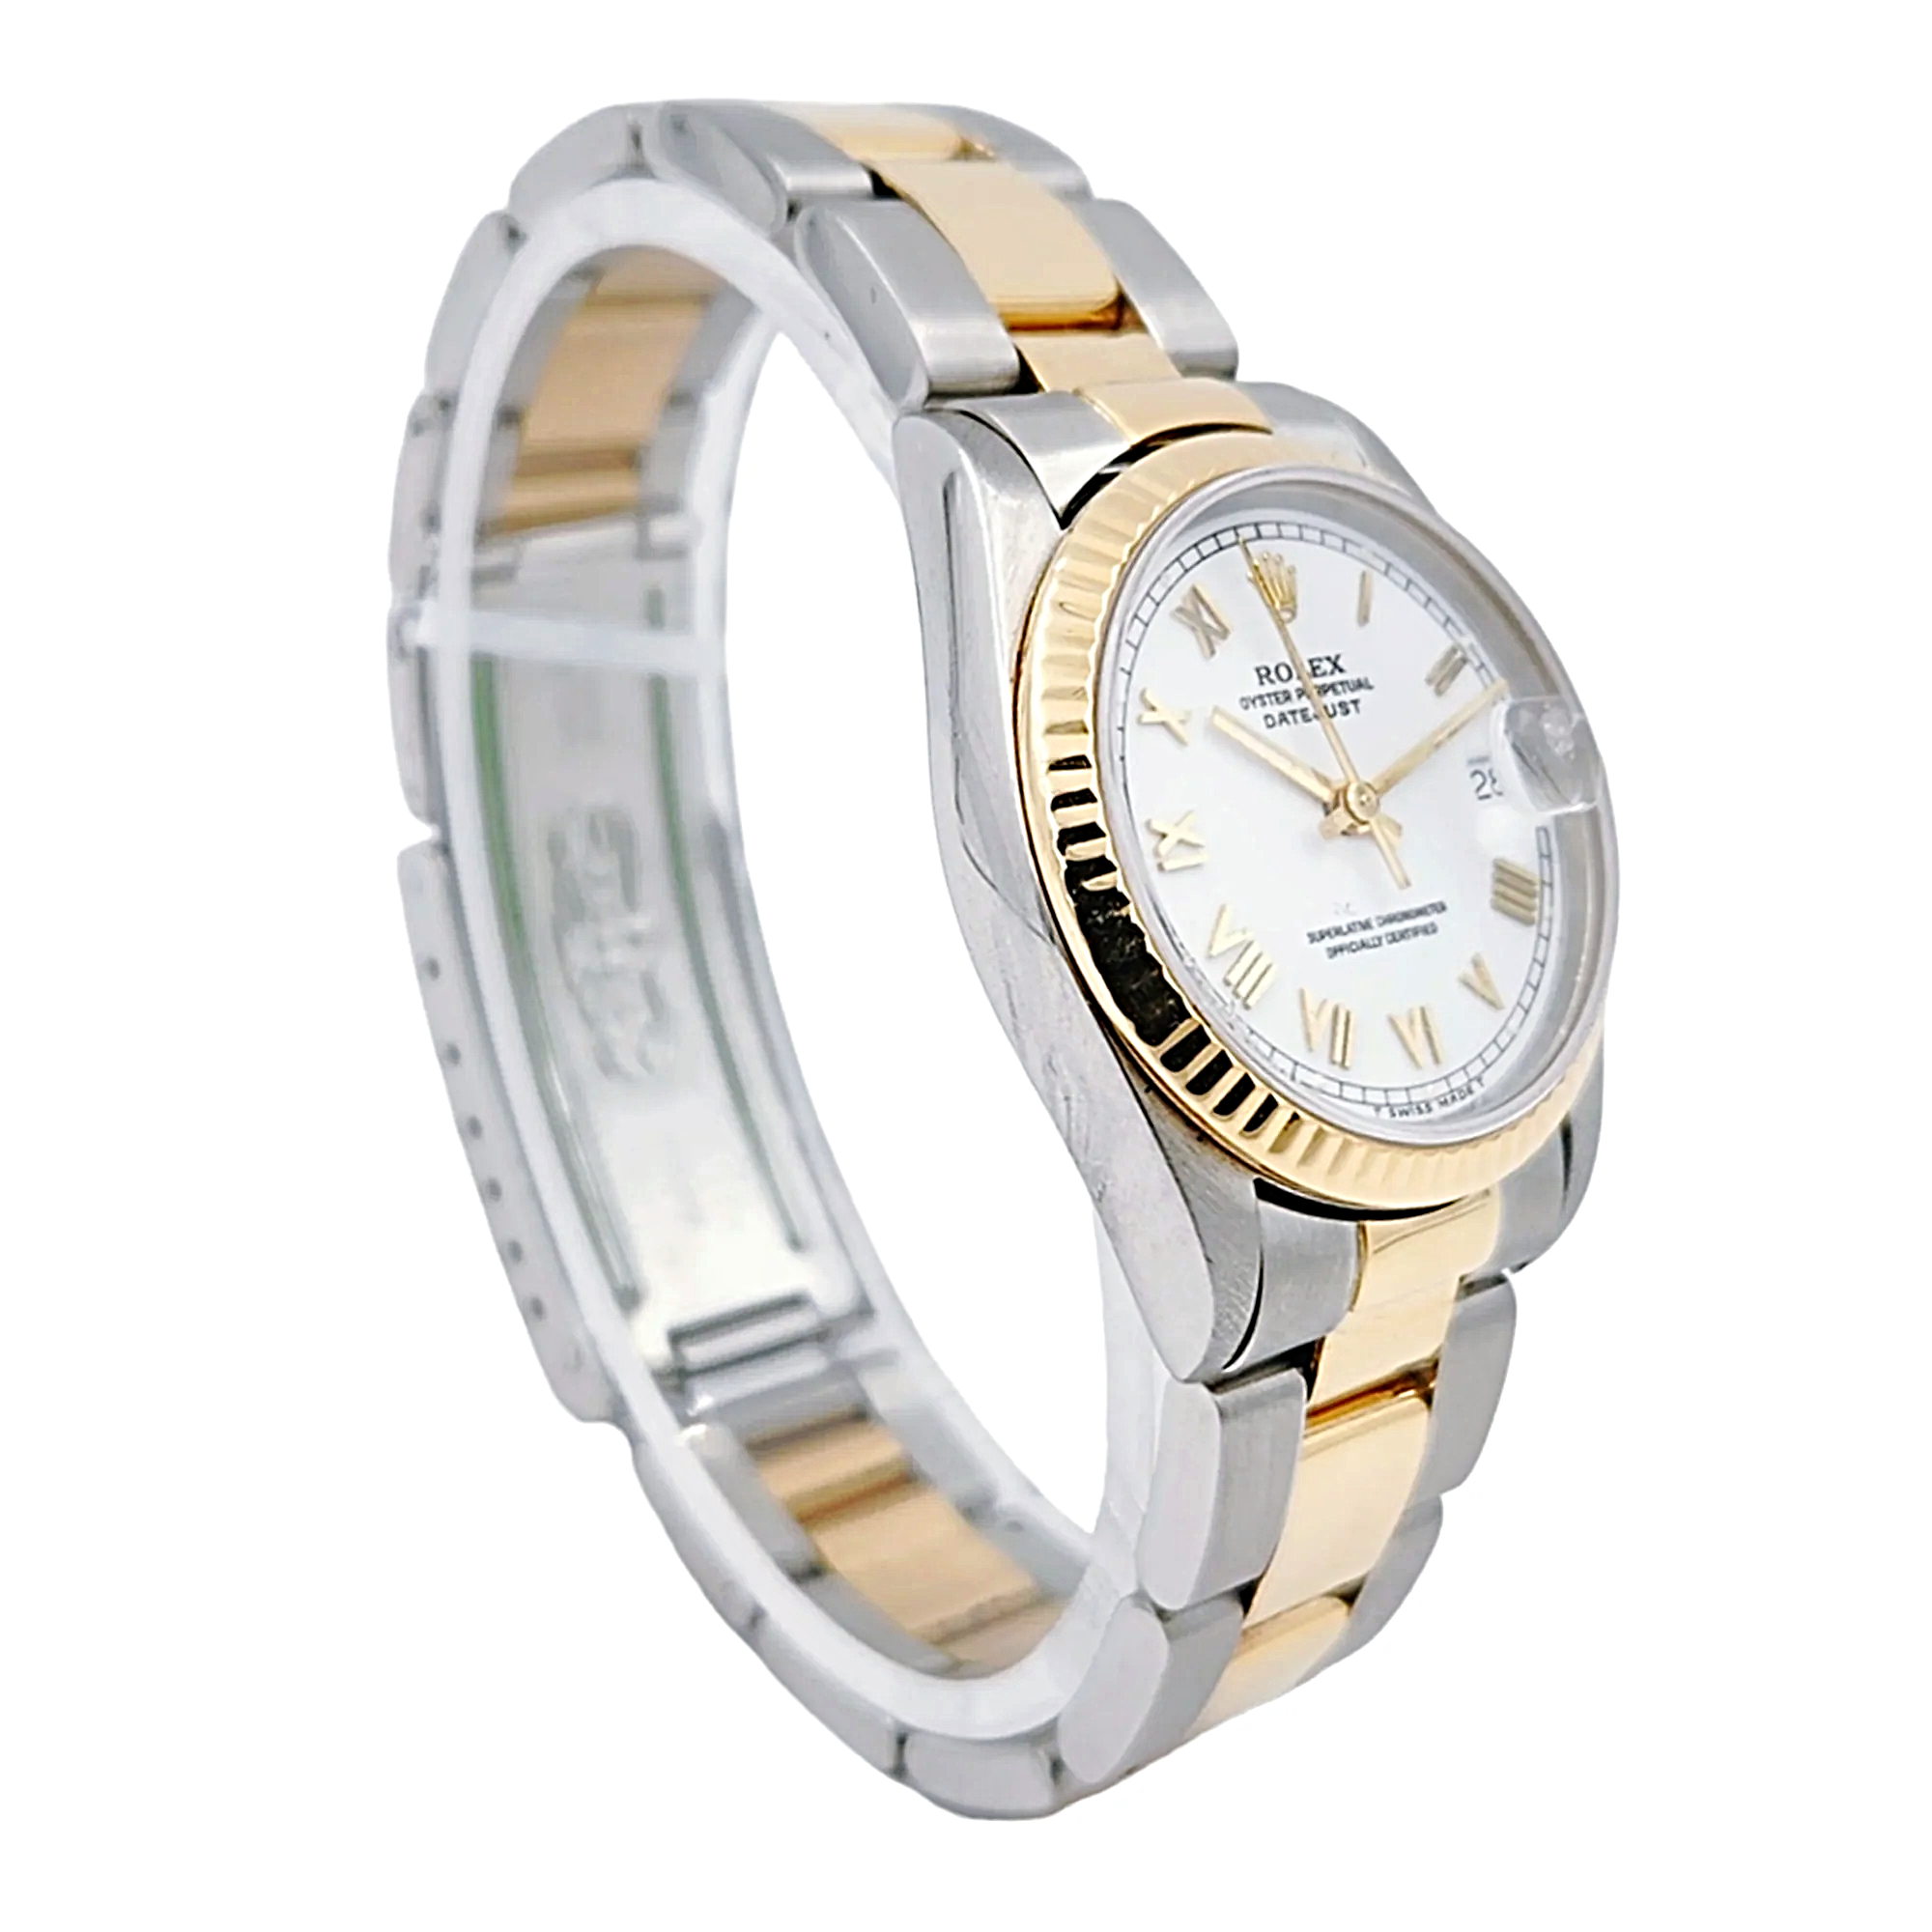 Ladies Rolex 31mm Midsize DateJust Two Tone Oyster 18K Yellow Gold / Stainless Steel Wristwatch w/ White Dial & Fluted Bezel. (Pre-Owned 68723)